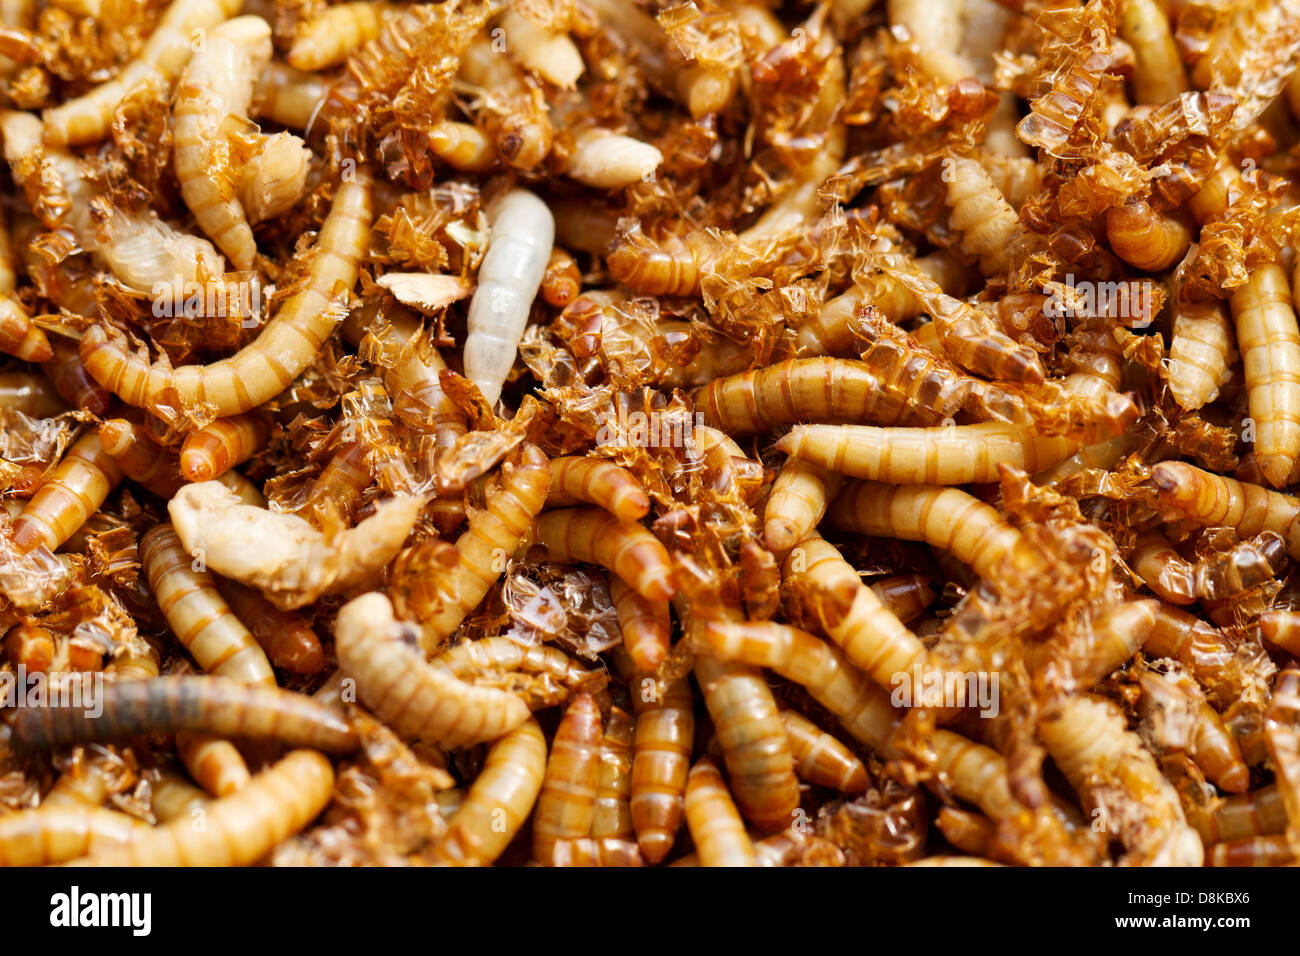 many ugly worms as background Stock Photo